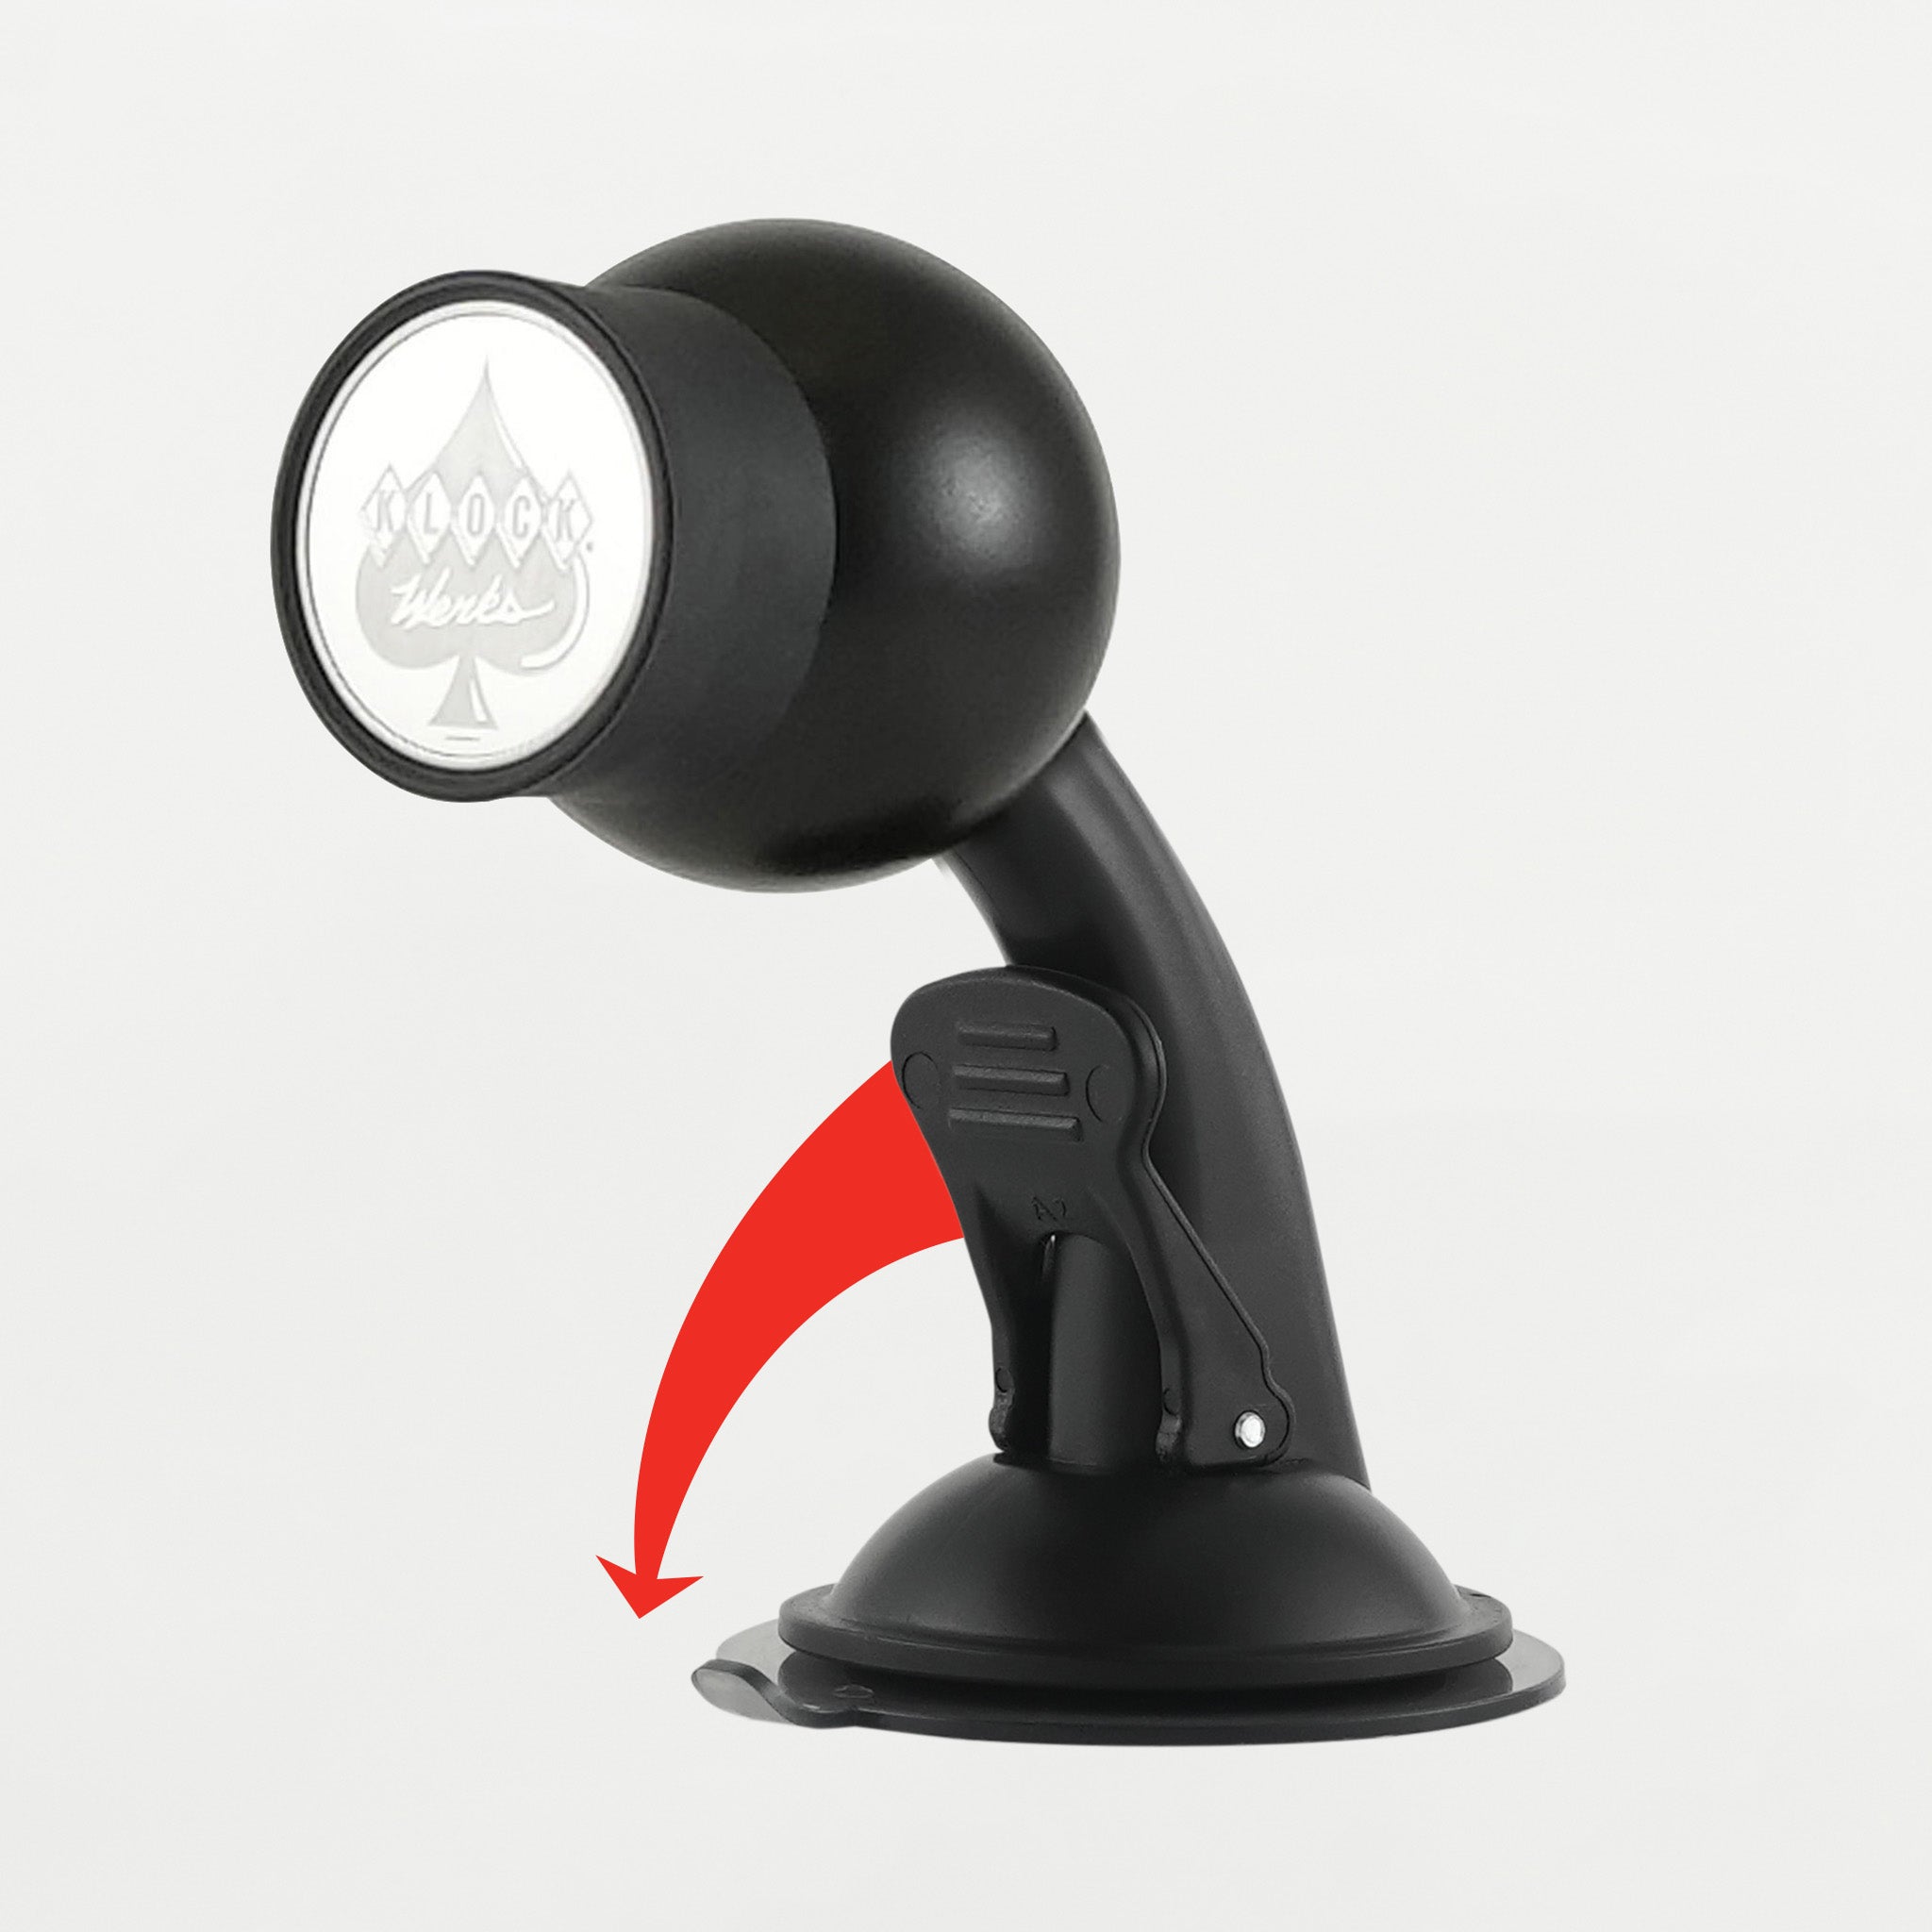 iOtraveler Suction Magnetic Phone Mount showing location of quick-release lever allows for quick positioning(Quick-release lever allows for quick positioning)